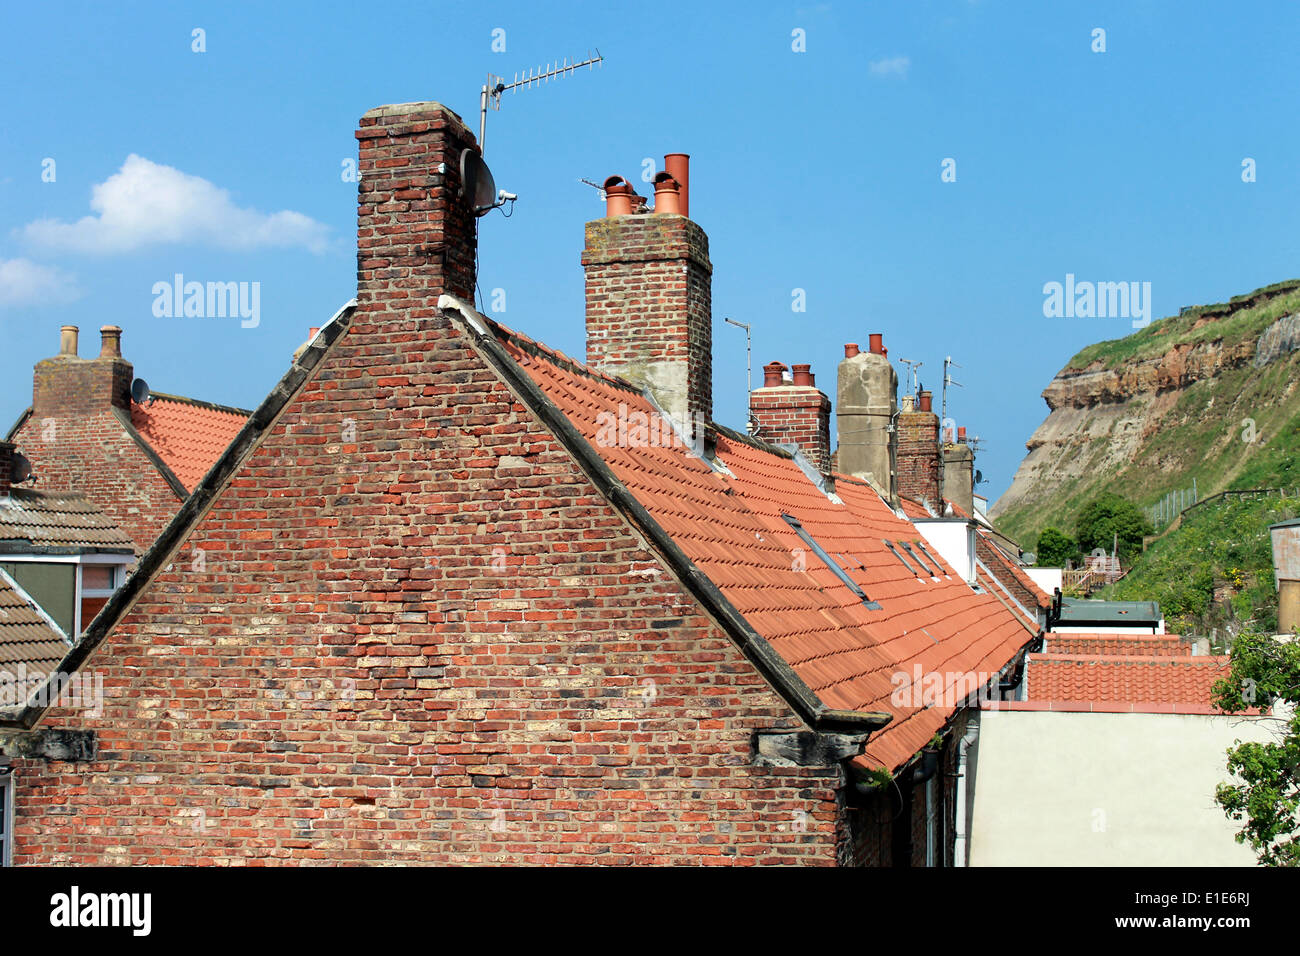 Red tiled houses in the town of Whitby, North Yorkshire, England. Stock Photo